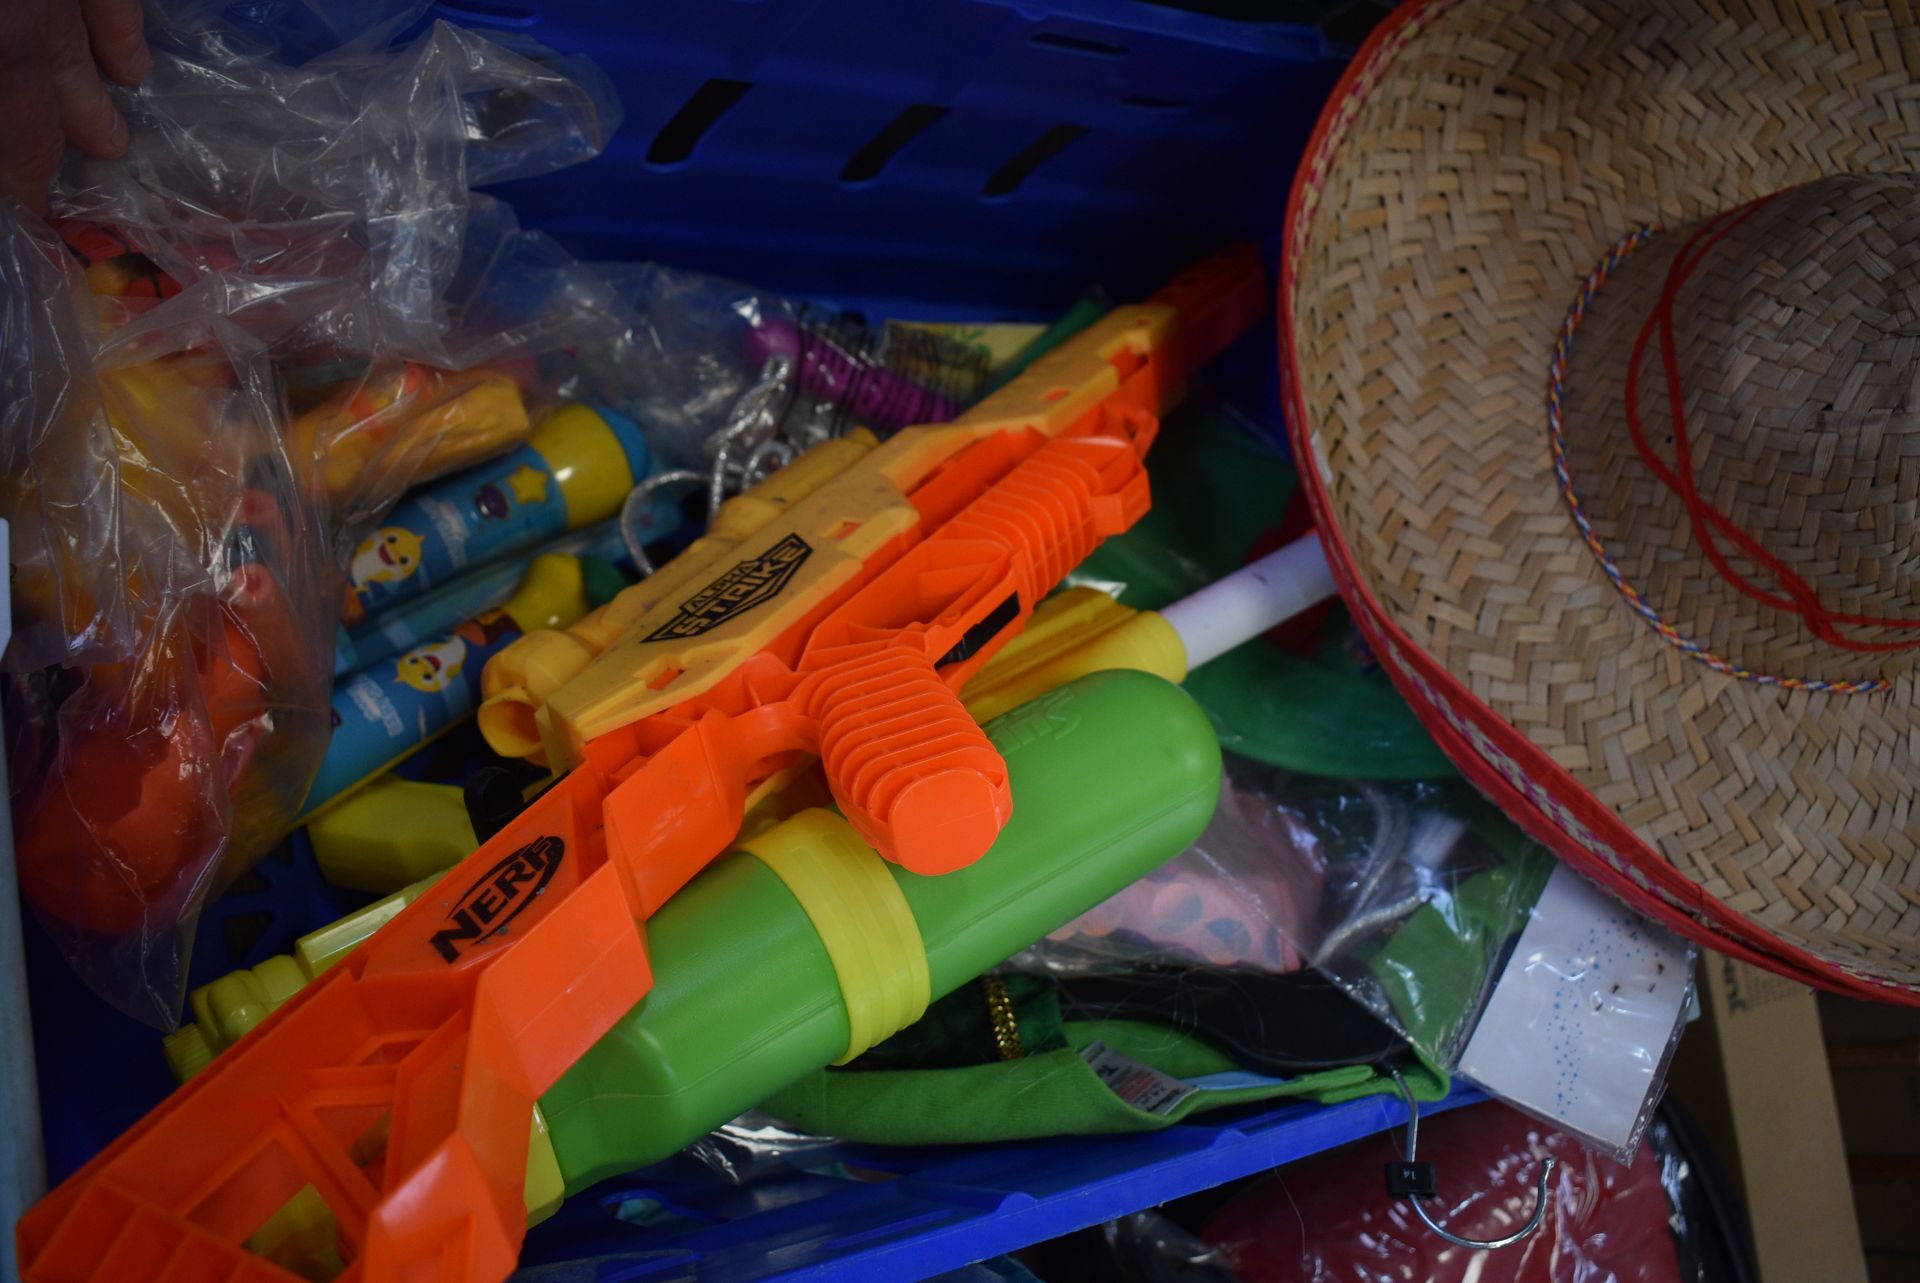 Various Play Items Including Water Guns, Baby Shark Microphone, Puzzles, etc. (basket not included)